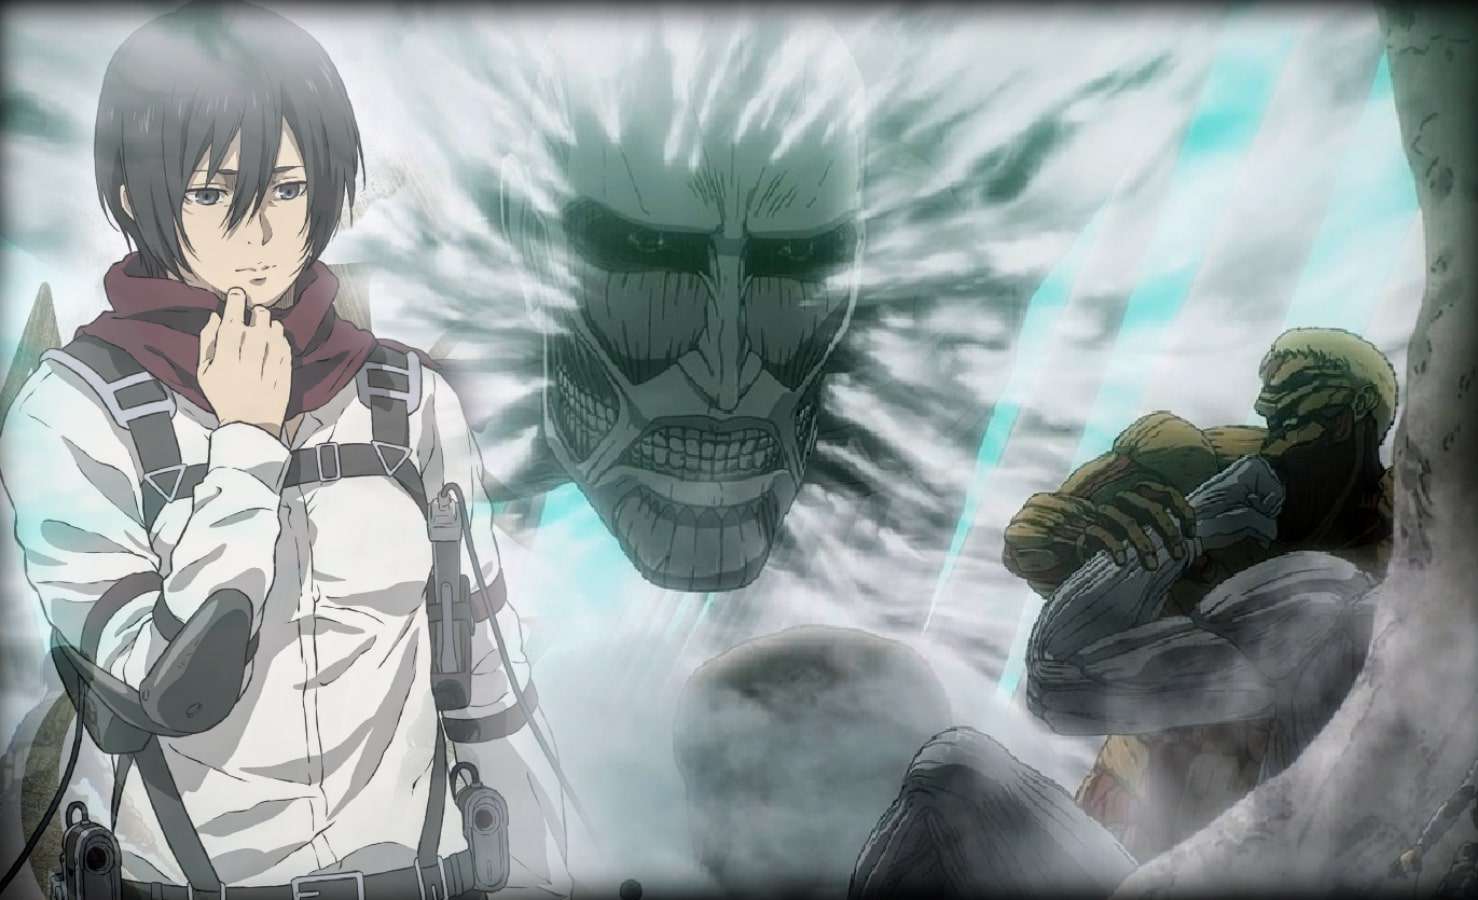 Mikasa in the final episode of Attack on Titan